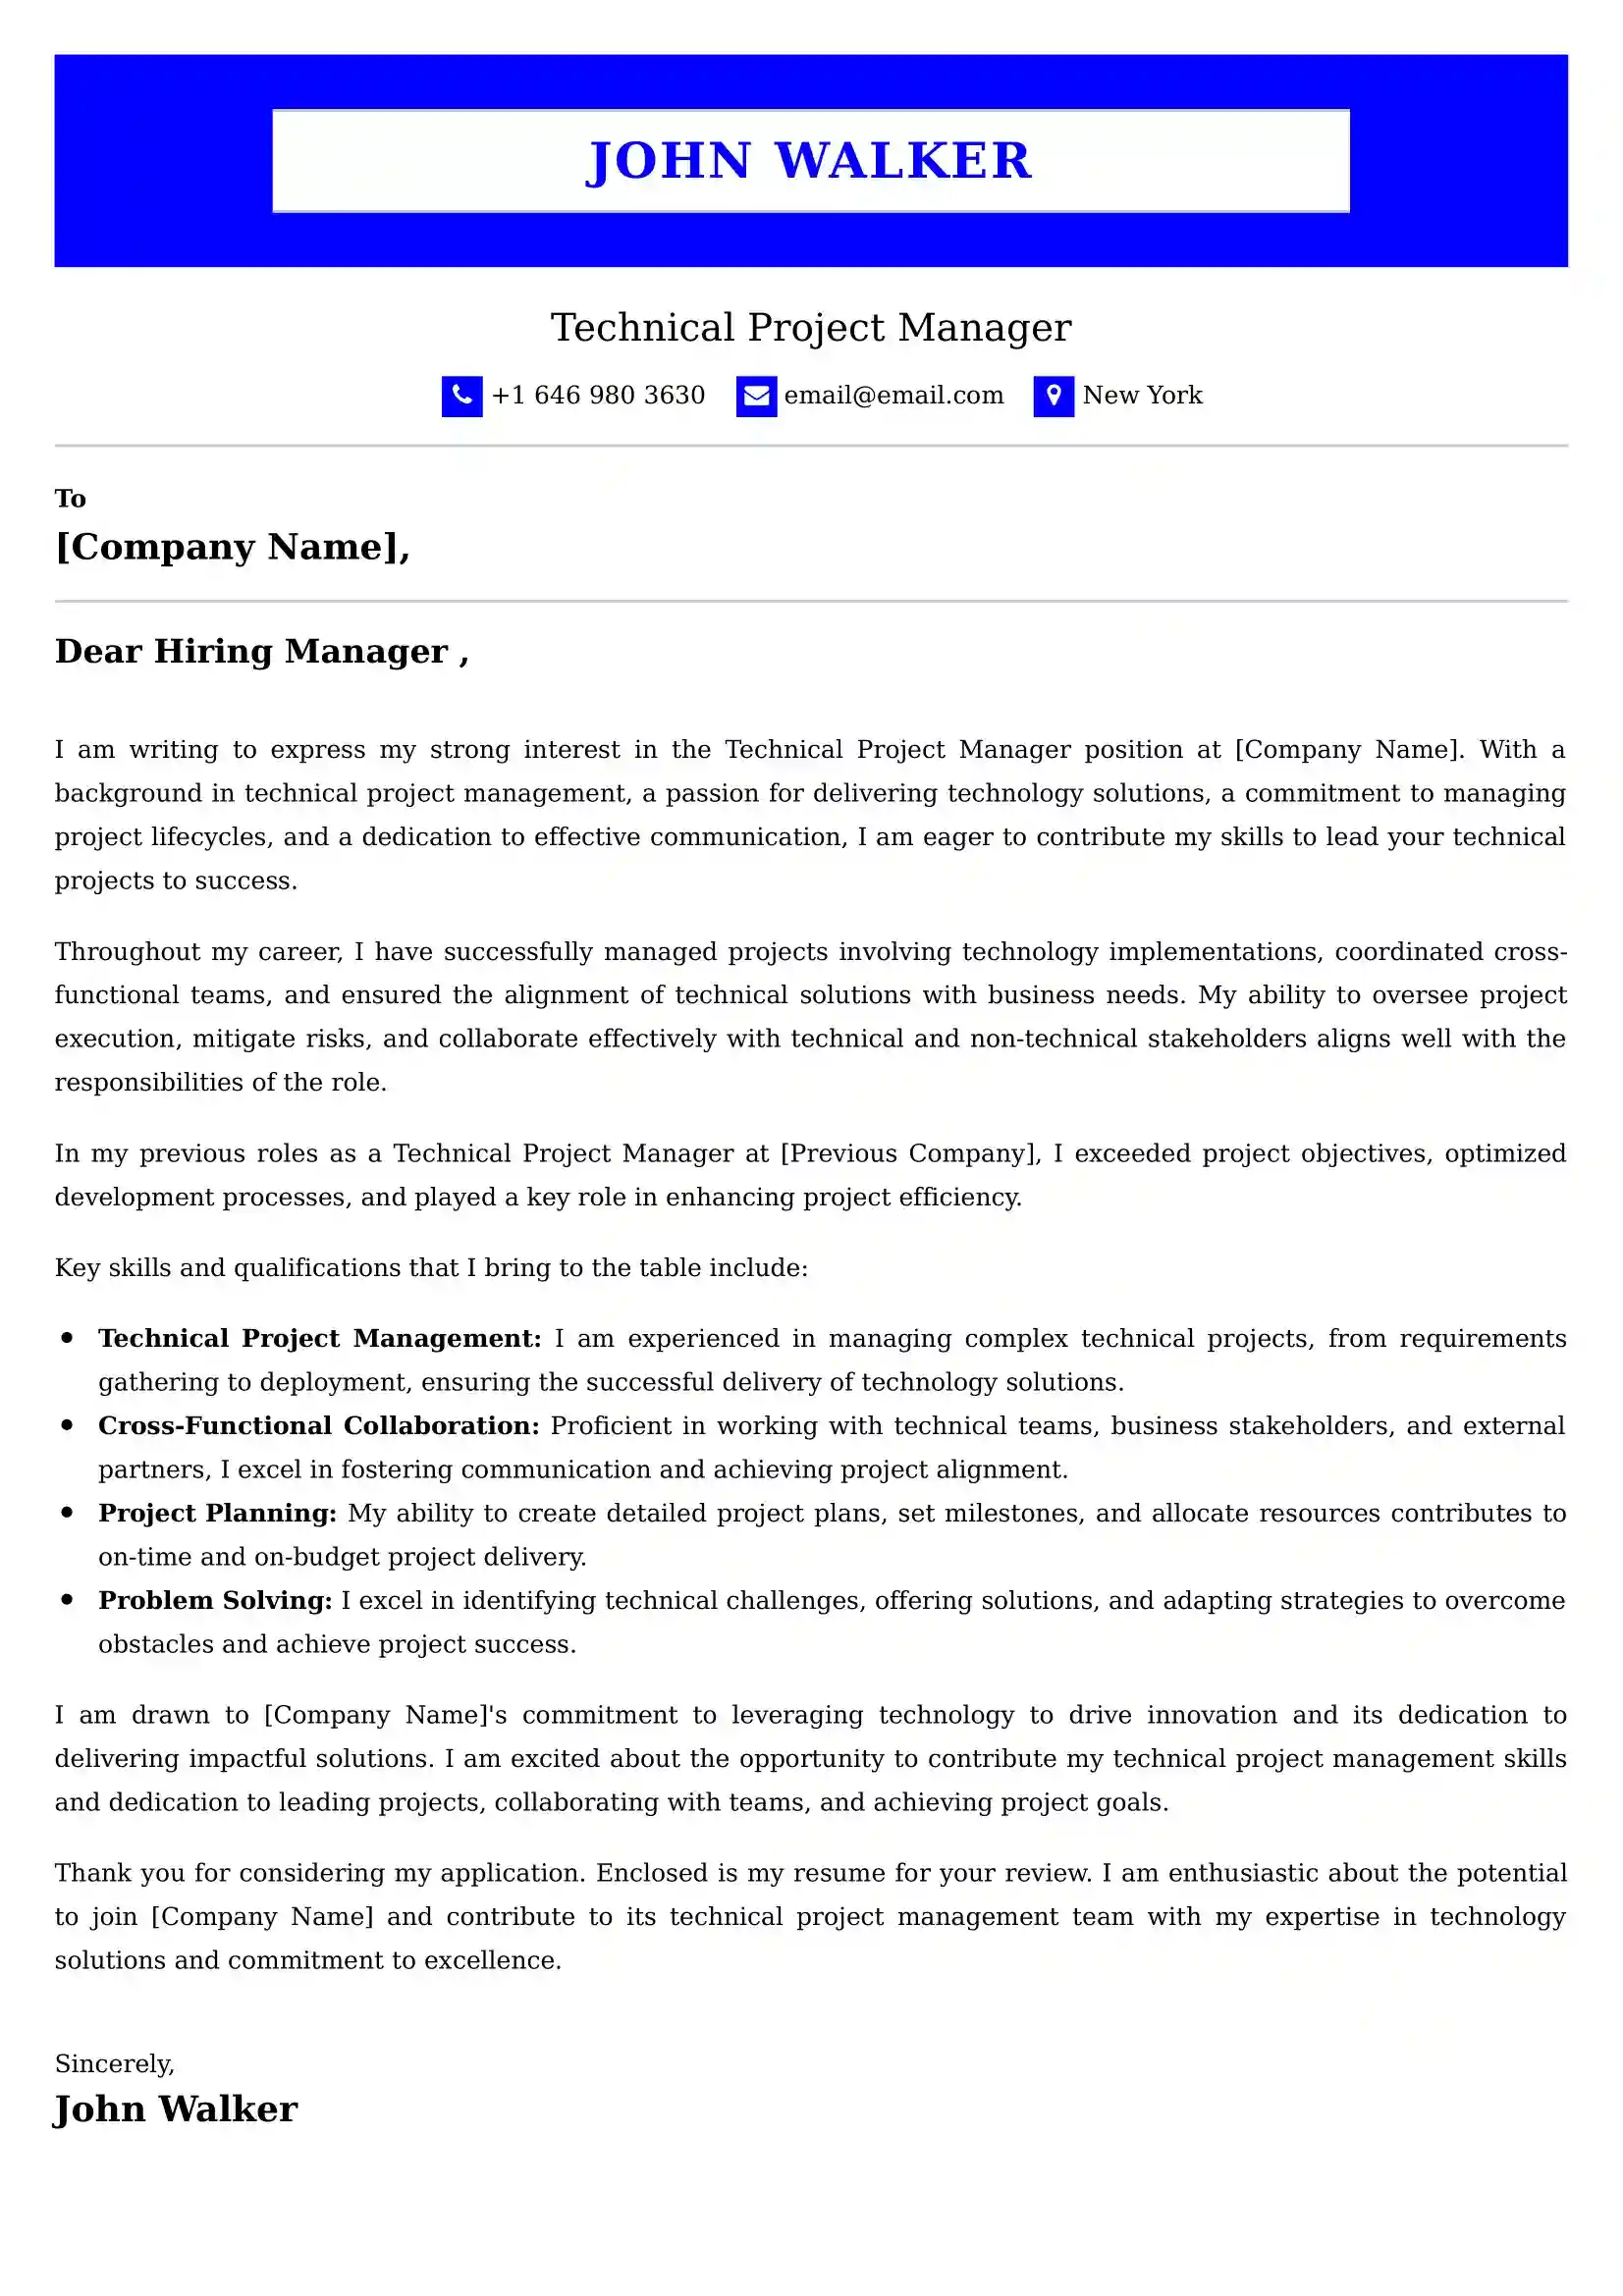 Technical Project Manager Cover Letter Examples UK - Tips and Guide